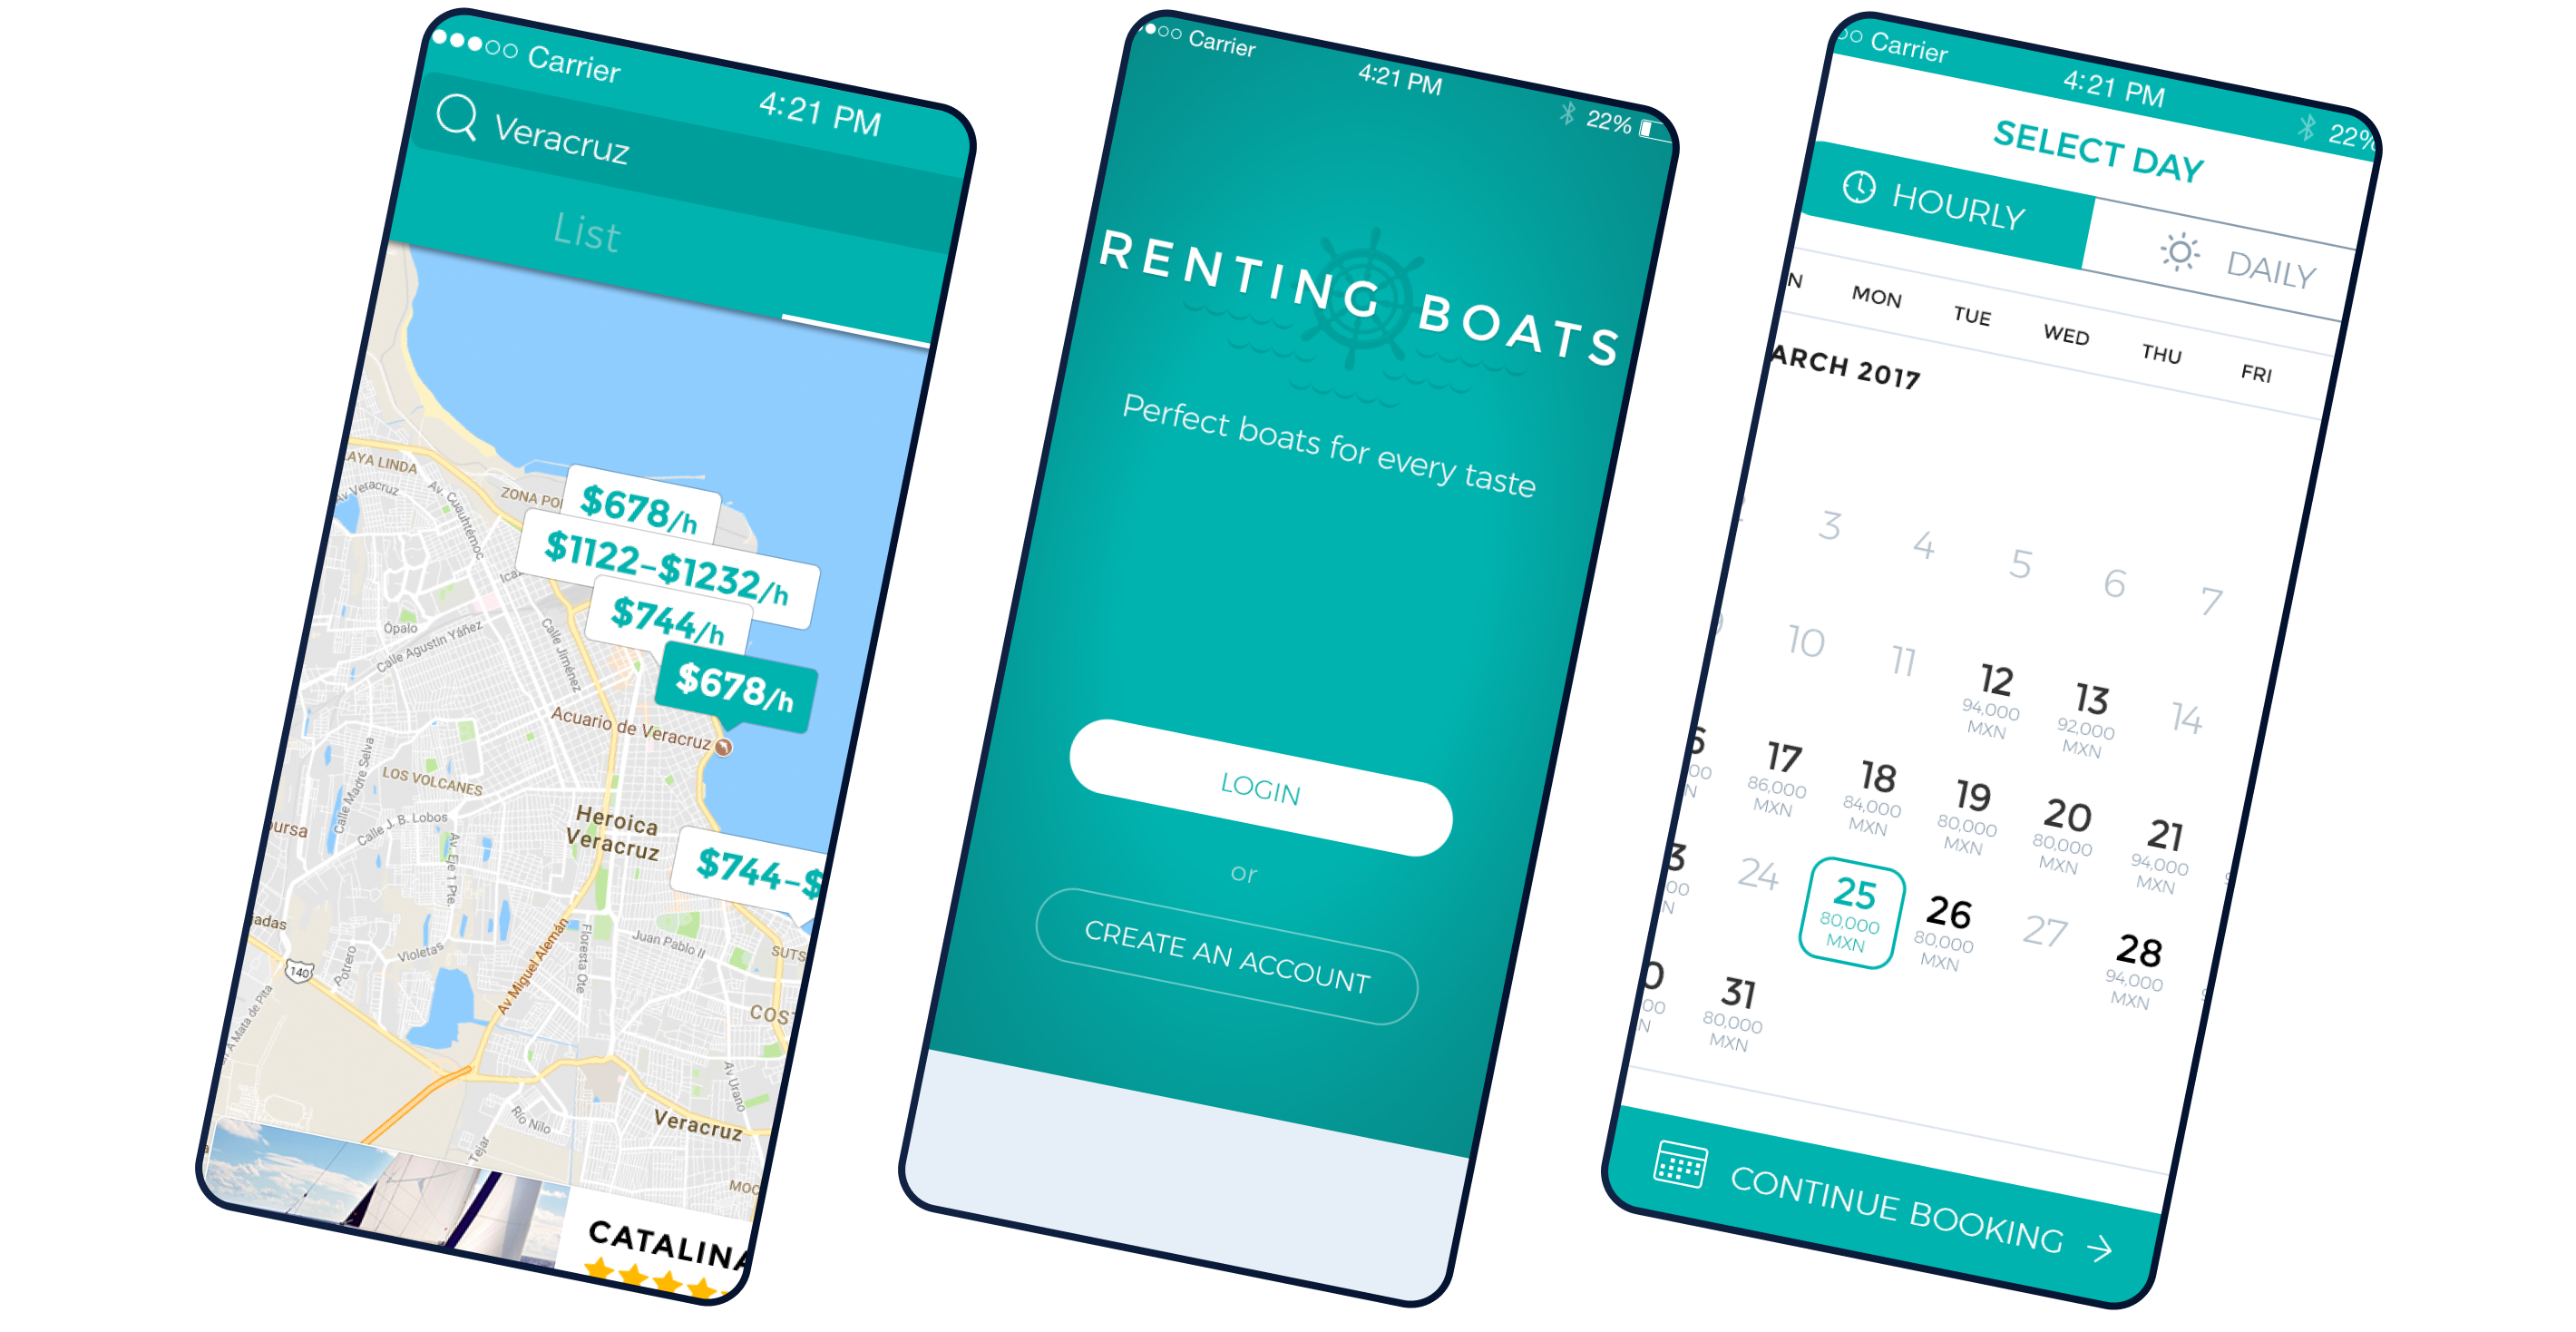 Renting boats mobile app